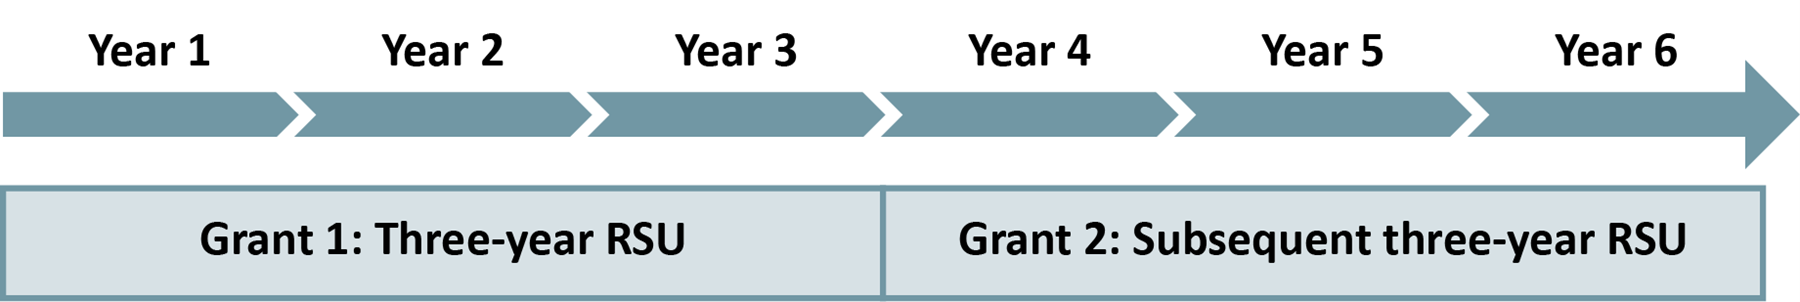 An RSU grant for meeting defined longer-term retention milestones, with a subsequent RSU grant once the original RSU milestone has been met.